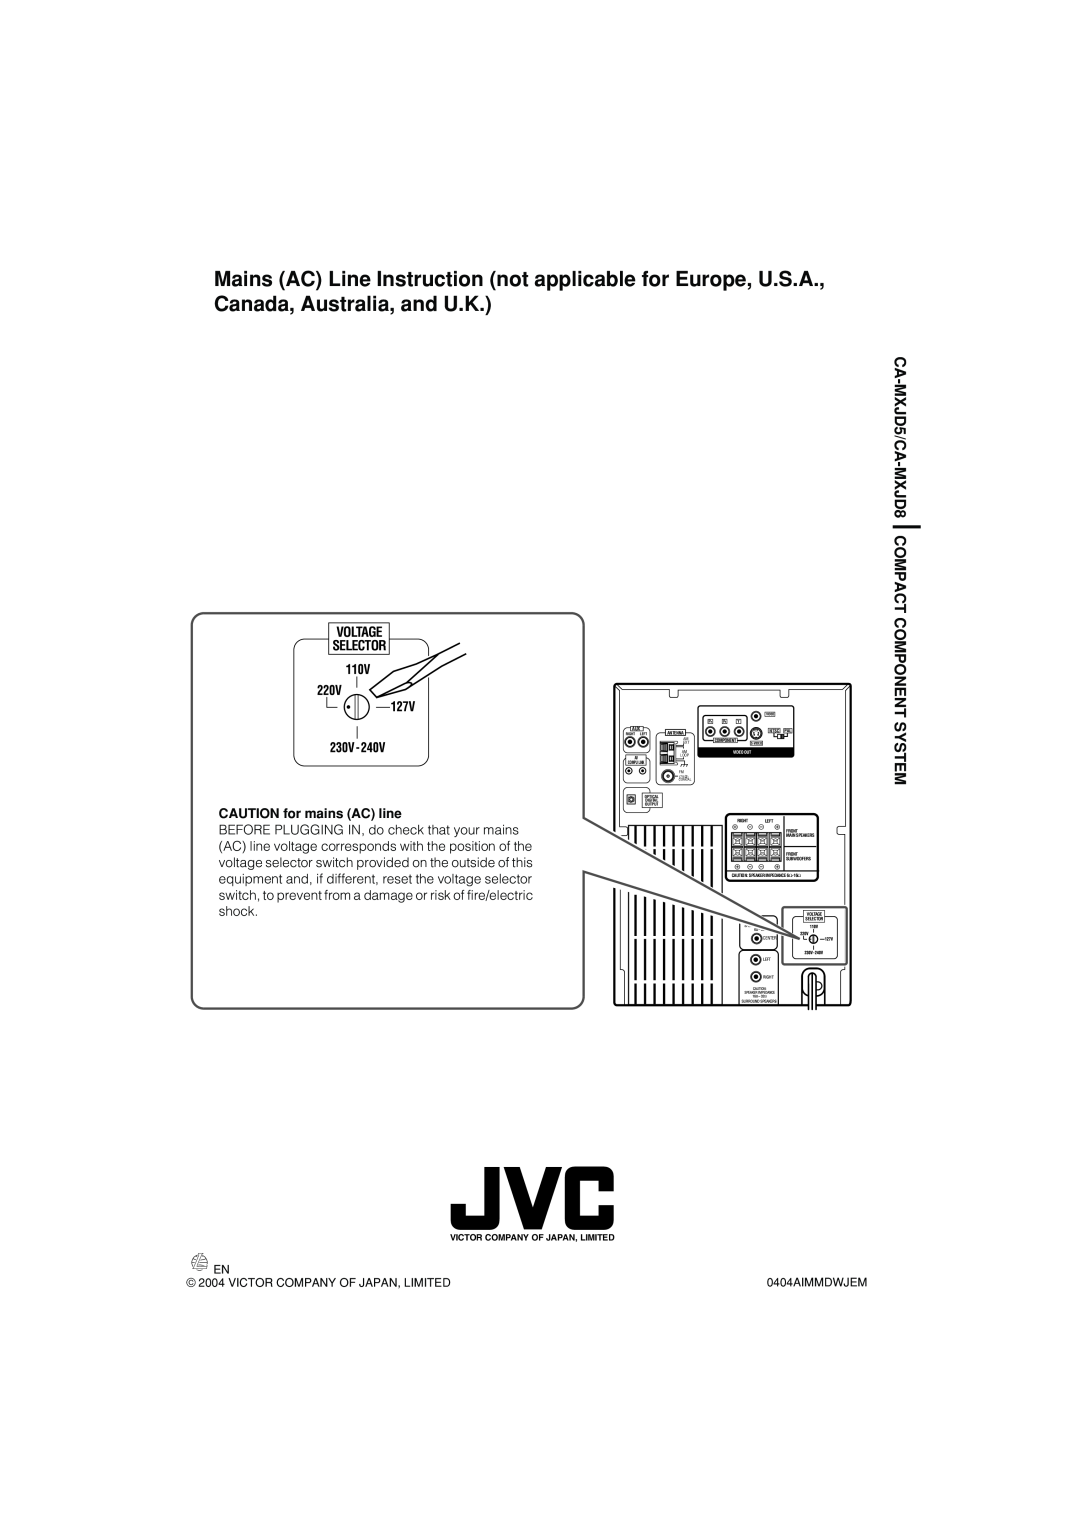 JVC manual CA-MXJD5/CA-MXJD8COMPACT COMPONENT SYSTEM, VOLTAGE SELECTOR CAUTION for mains AC line, 0404AIMMDWJEM 